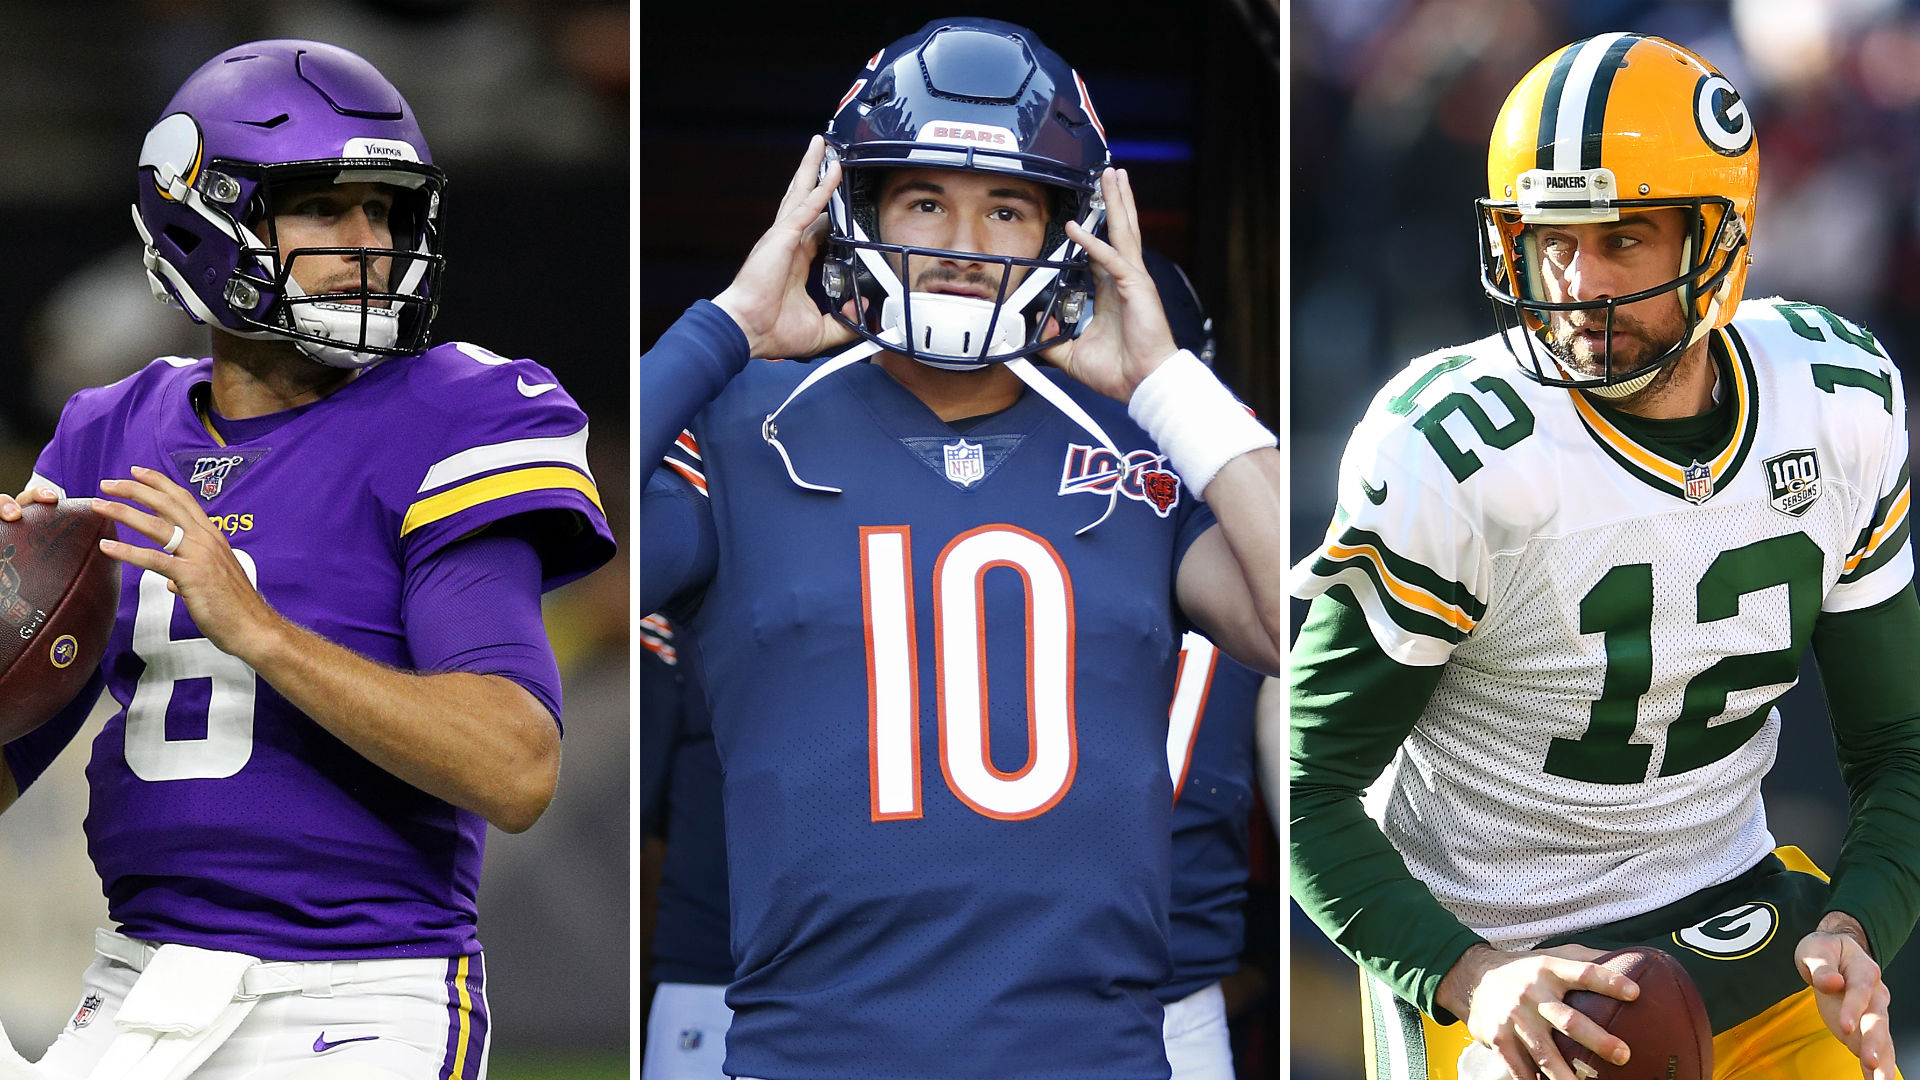 Flipboard: NFL preview 2019: NFC North player to watch, impact rookie, projected finish